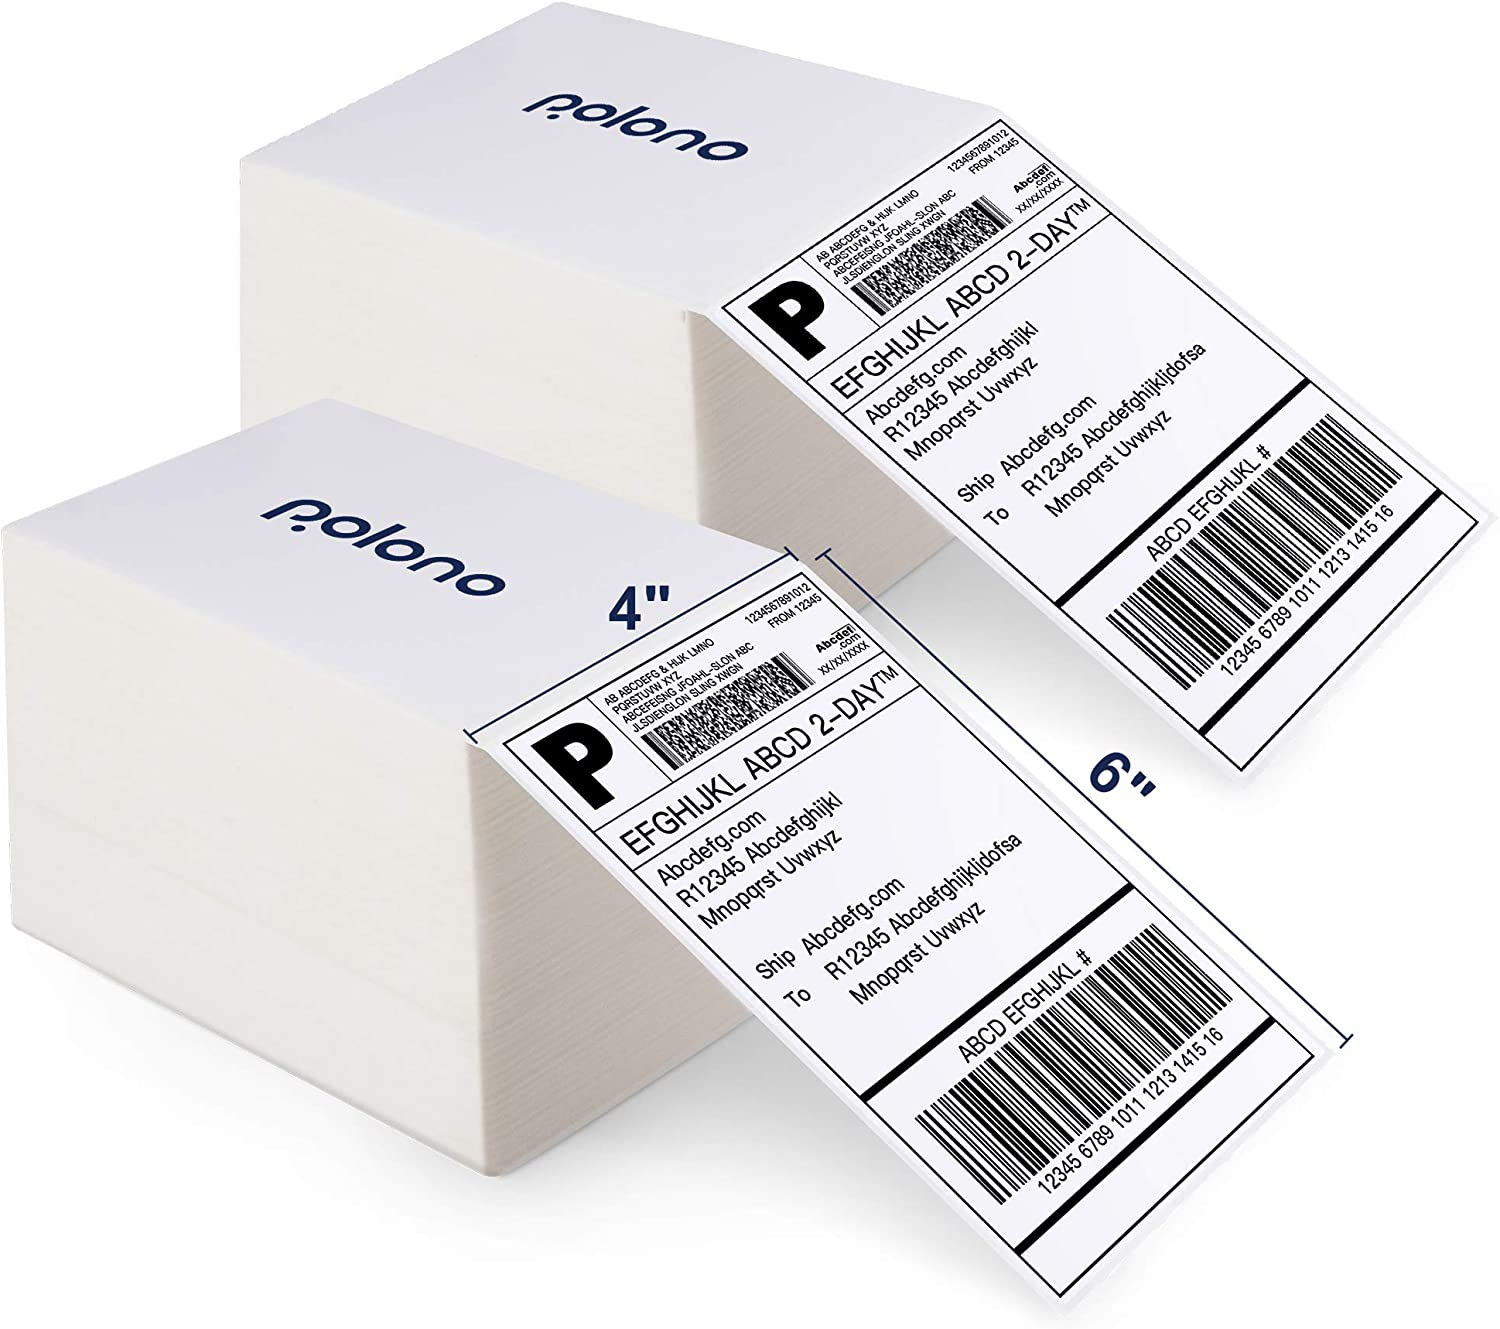 Identco TTL4P Perforated Thermal Transfer Paper Packaging Label